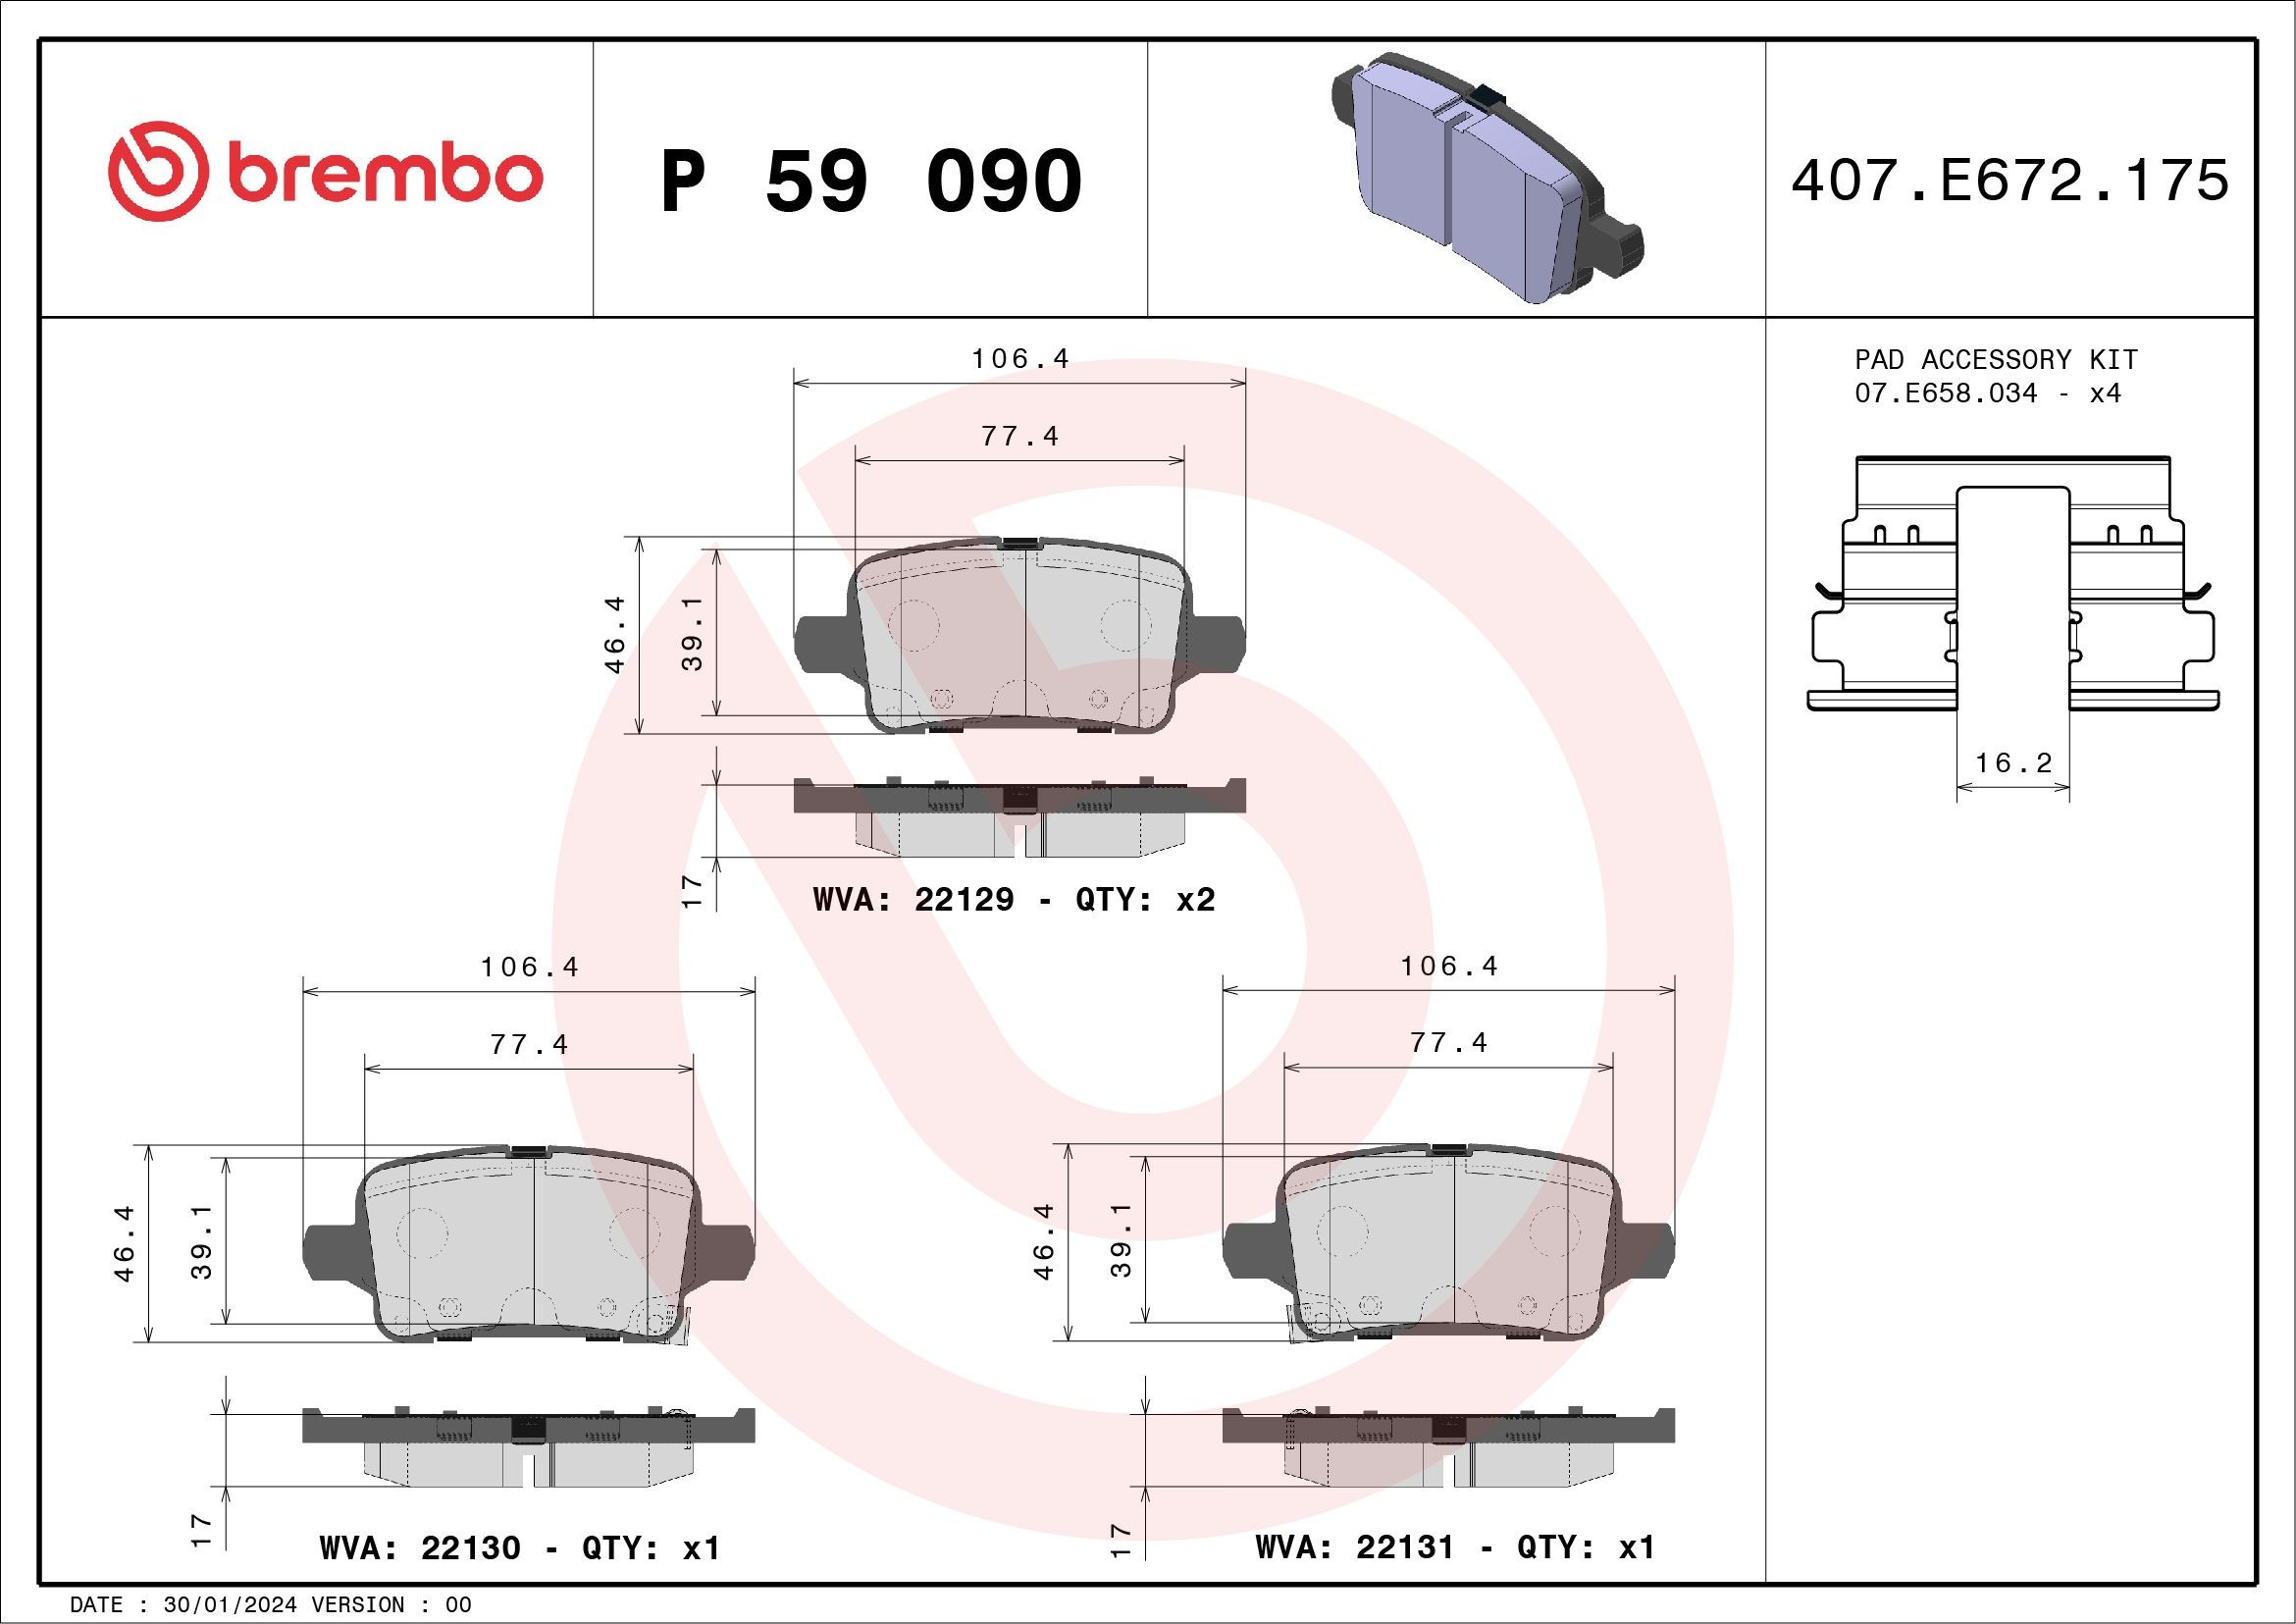 P59090 Set of brake pads D1857 9085 BREMBO with acoustic wear warning, with accessories